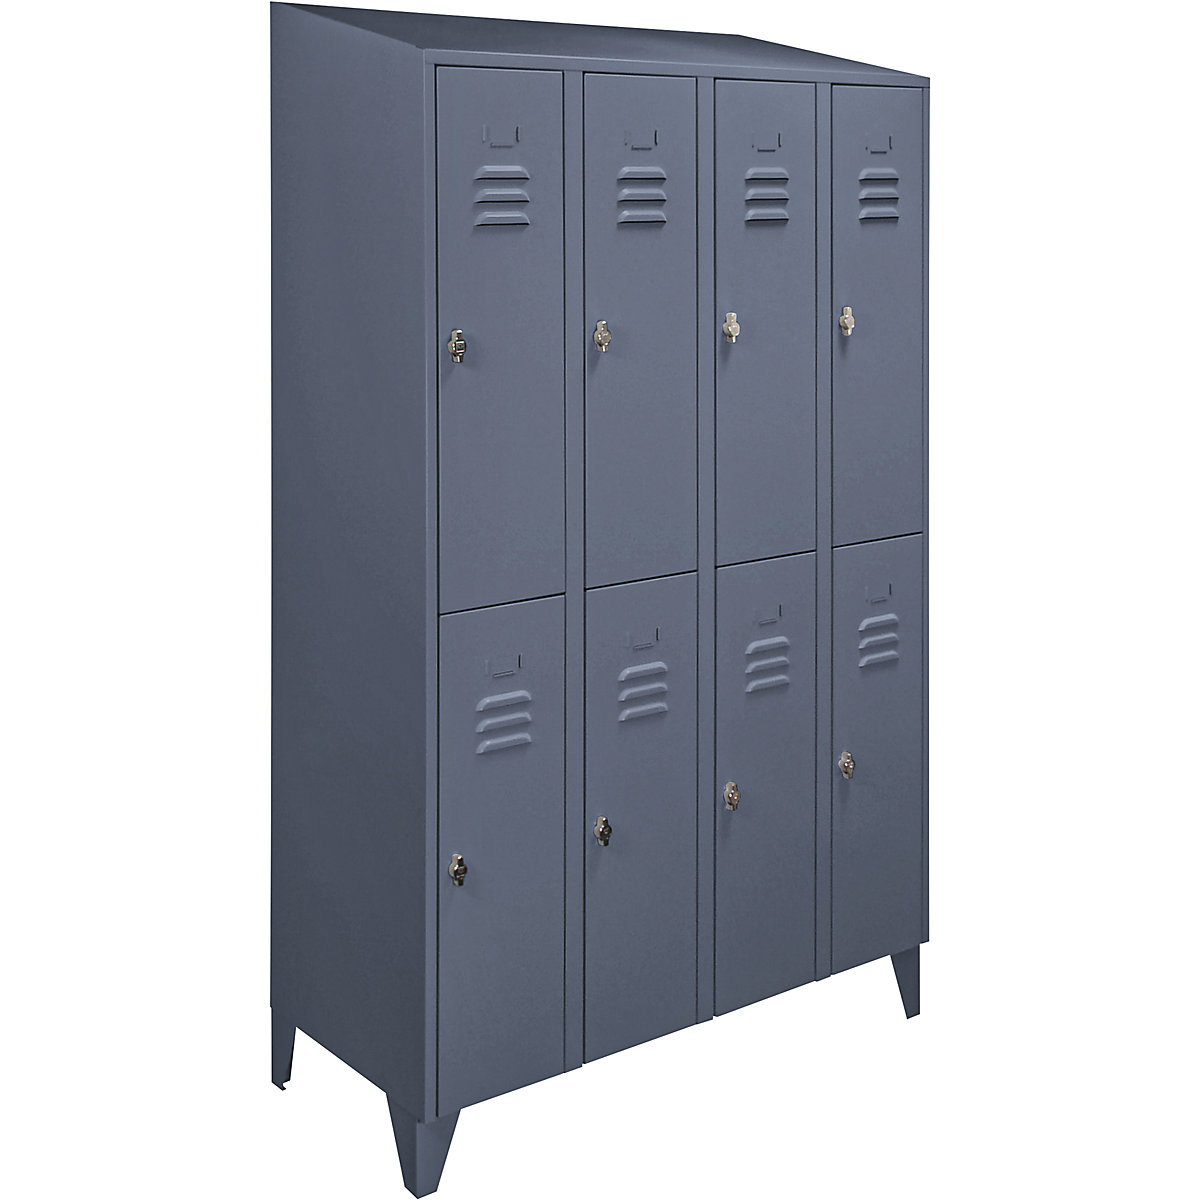 Cloakroom locker with sloping roof, half-height compartments - Wolf